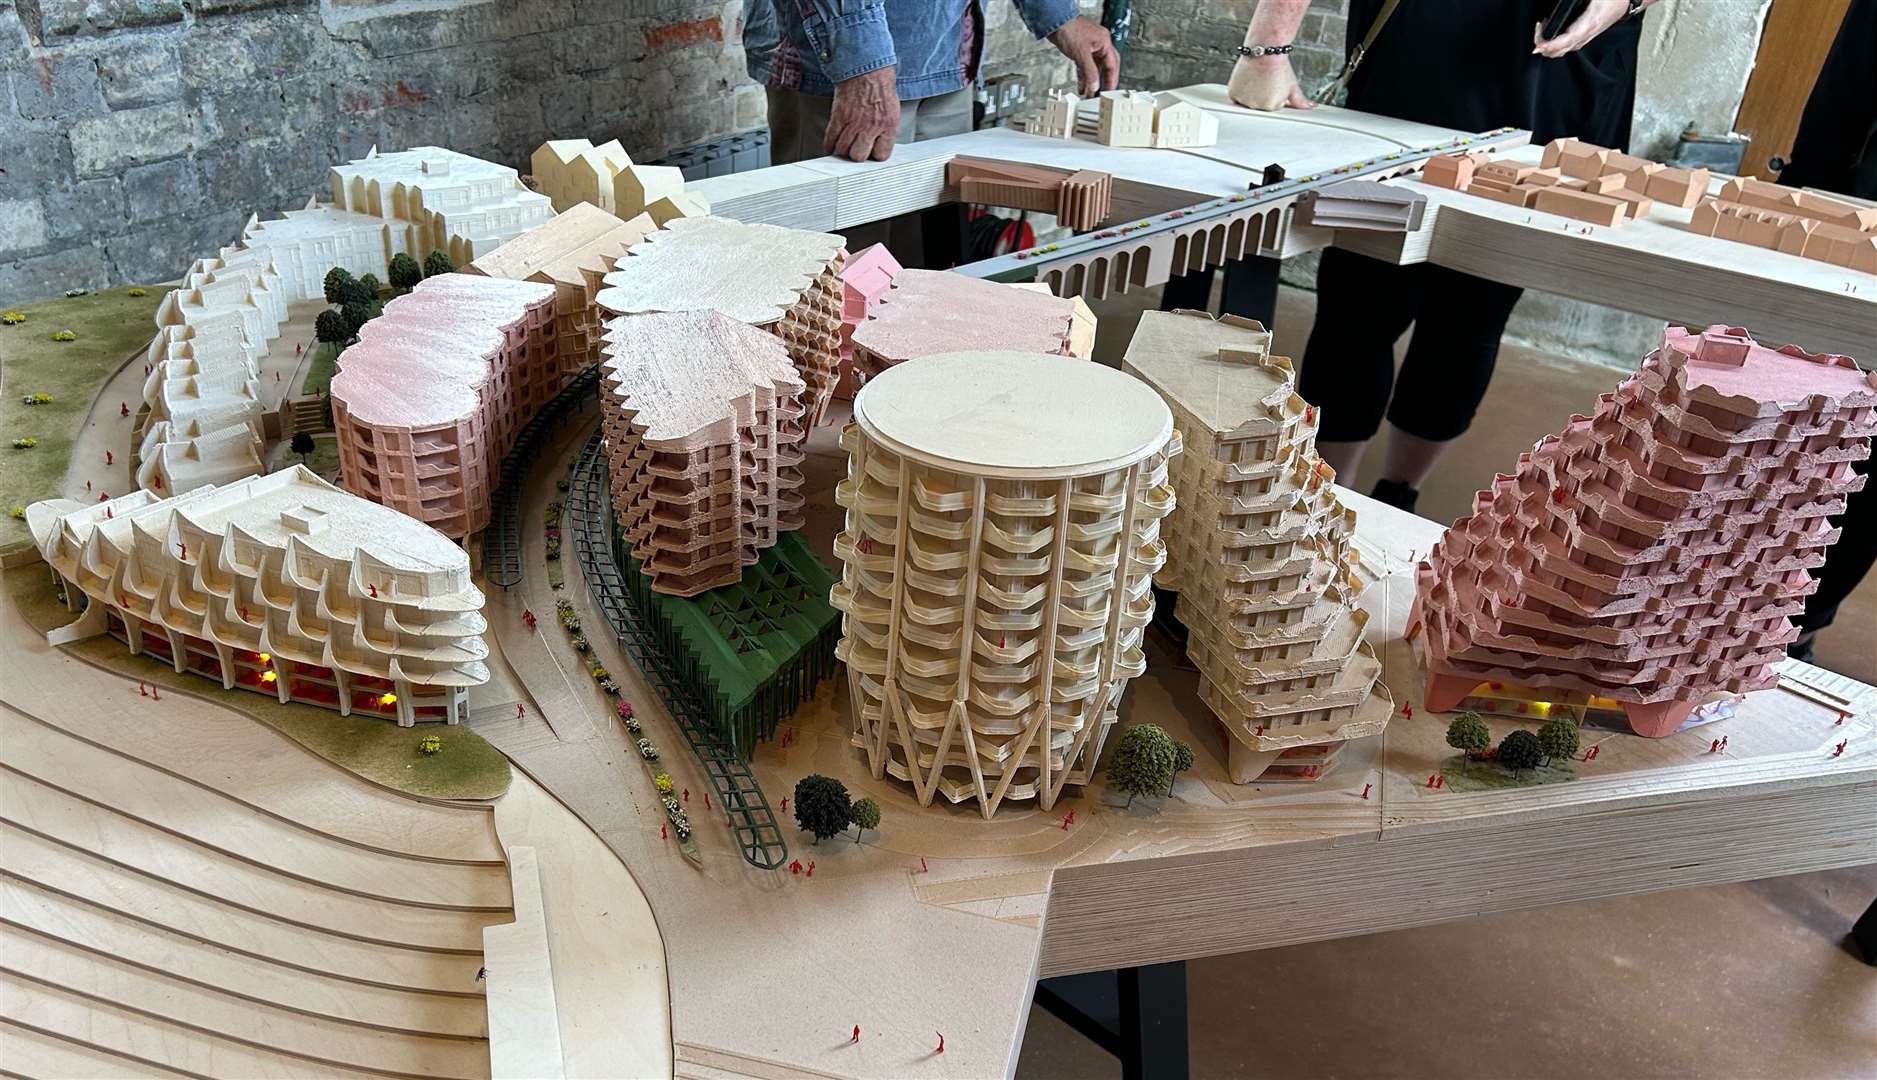 3D designs showing the proposed buildings on Folkestone's harbour